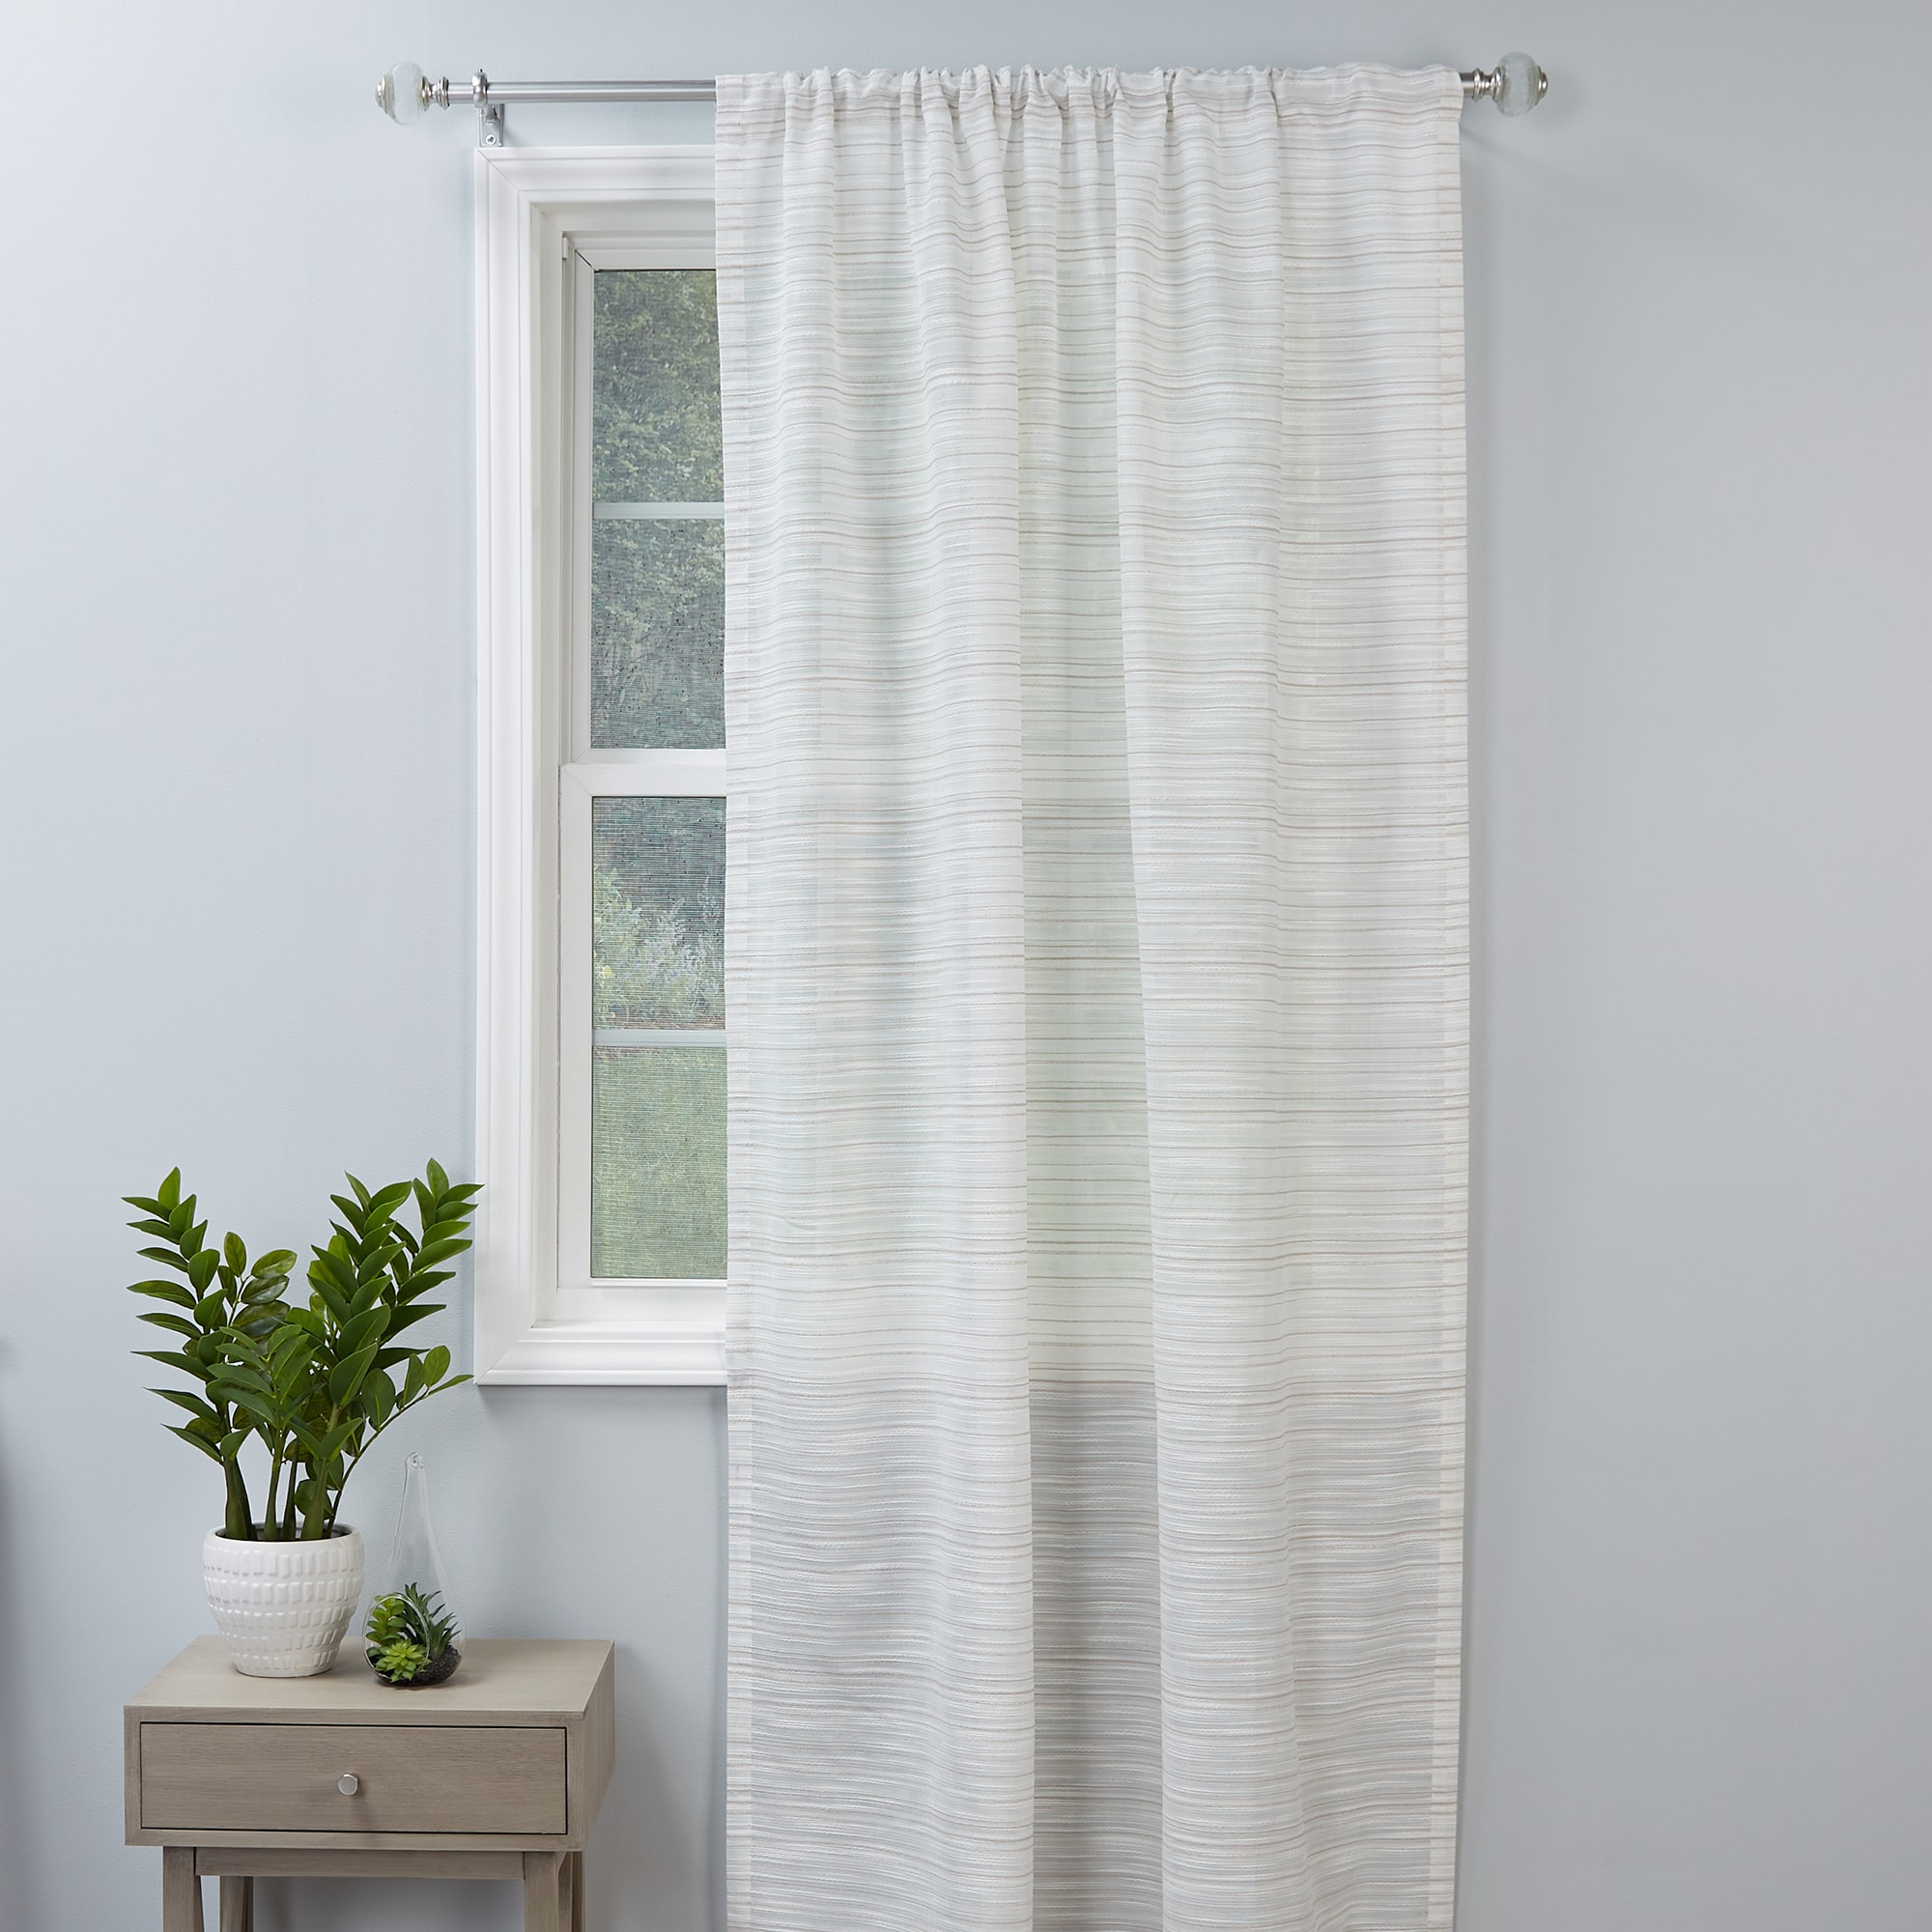 department Filtering Single Taupe + in at 84-in Drapes & roth Panel Curtain the allen Pocket Light Rod Curtains